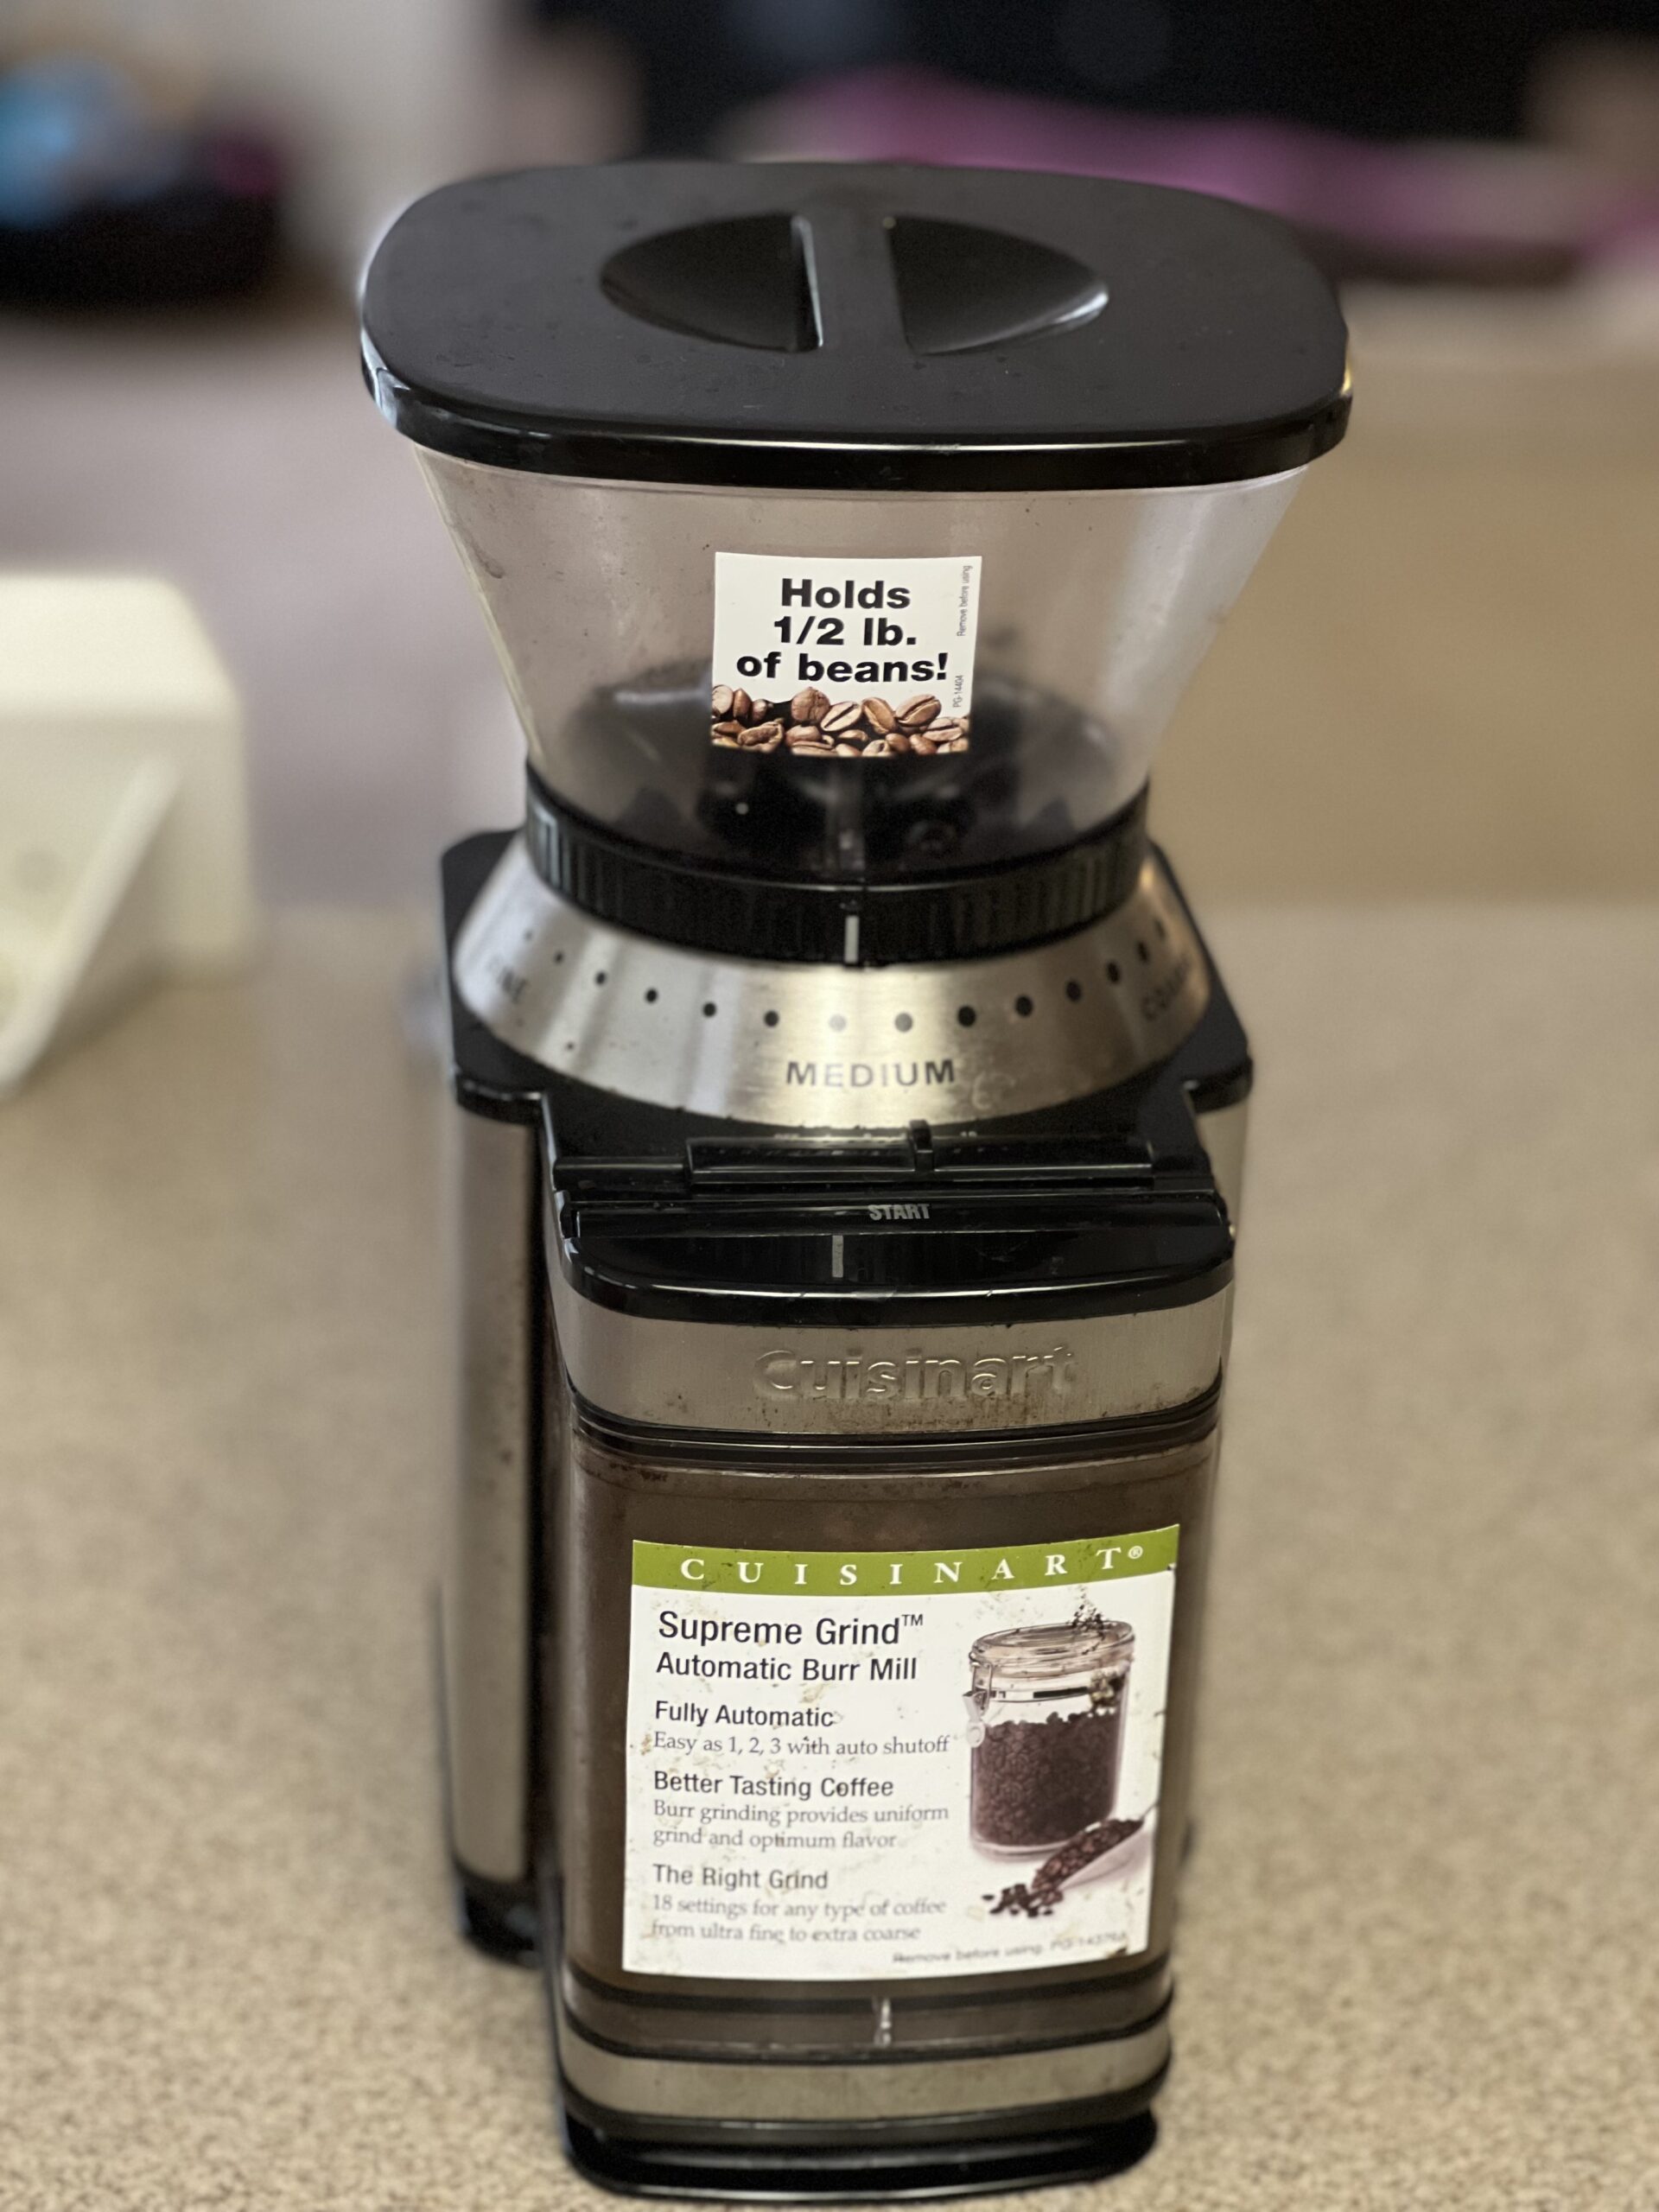 How To Clean Cuisinart Coffee Grinder?  